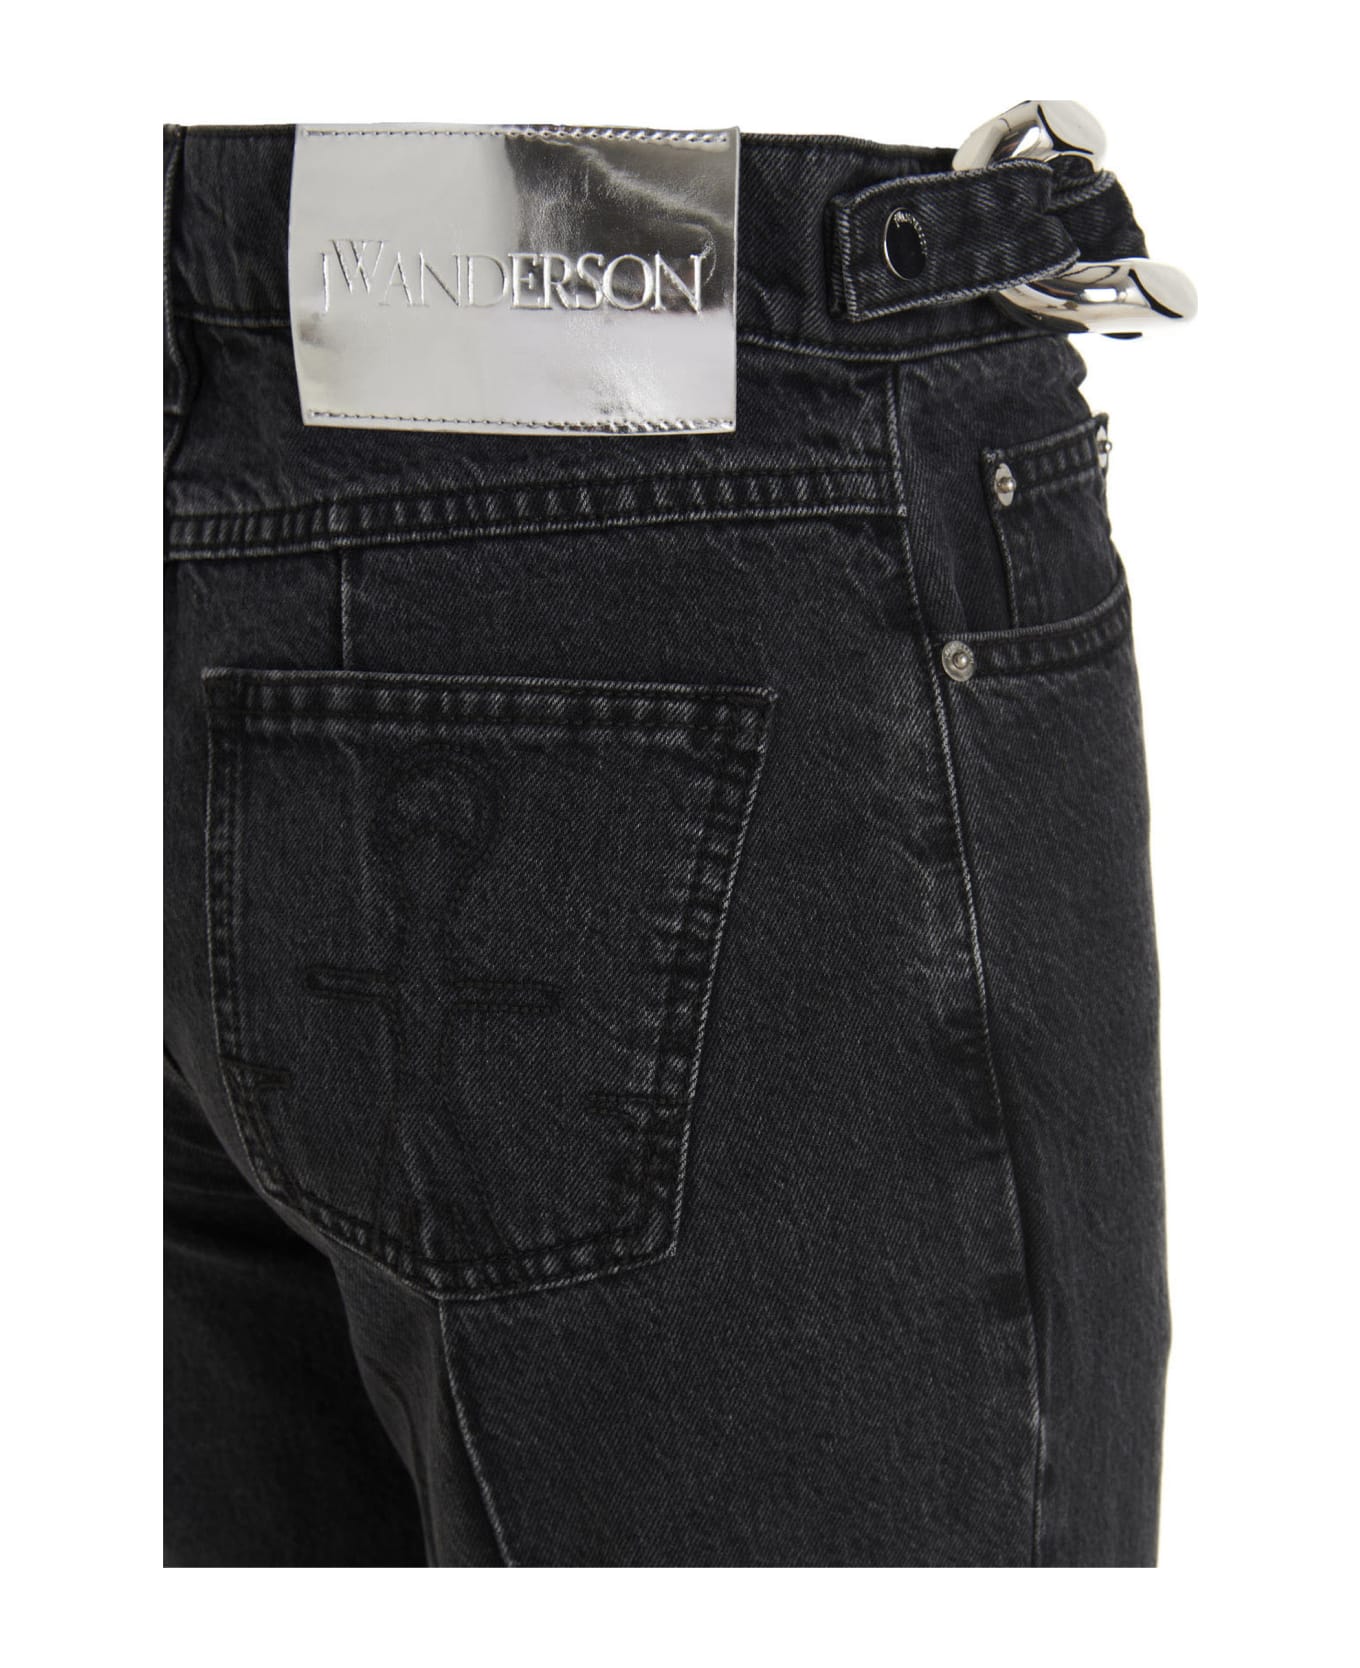 J.W. Anderson 'chain Link' Jeans - BLACK